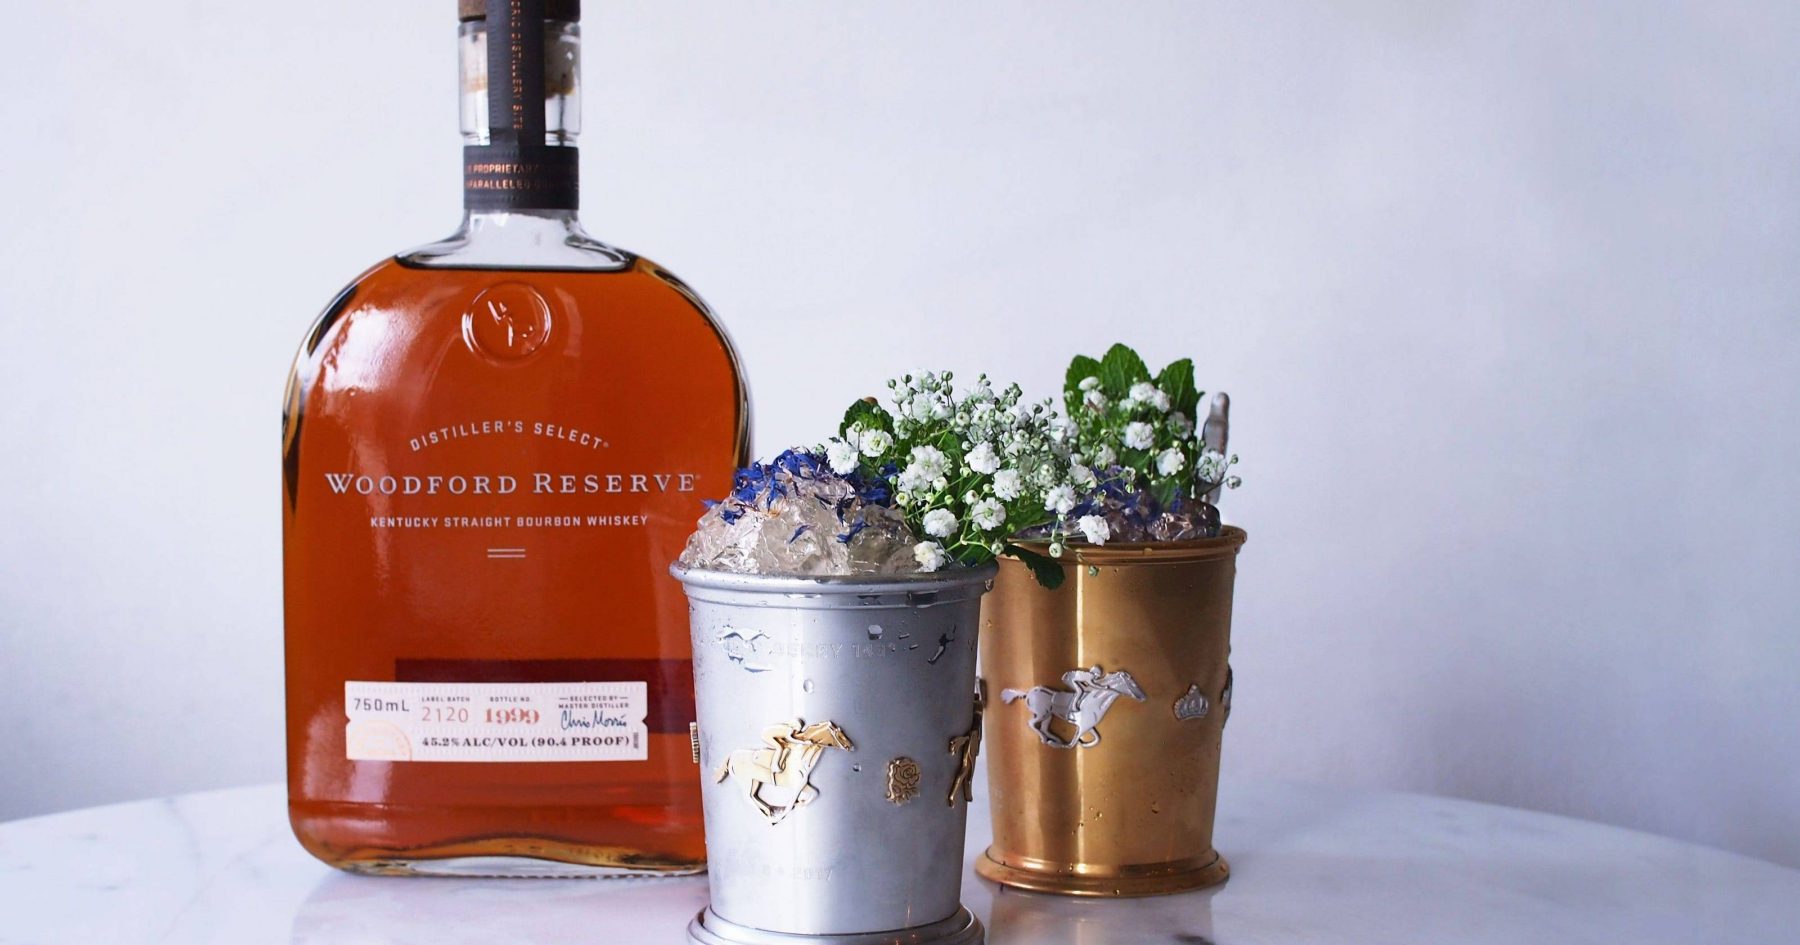 Mint Julep cup in a gold and silver cup with a bottle of Woodford Reserve behind